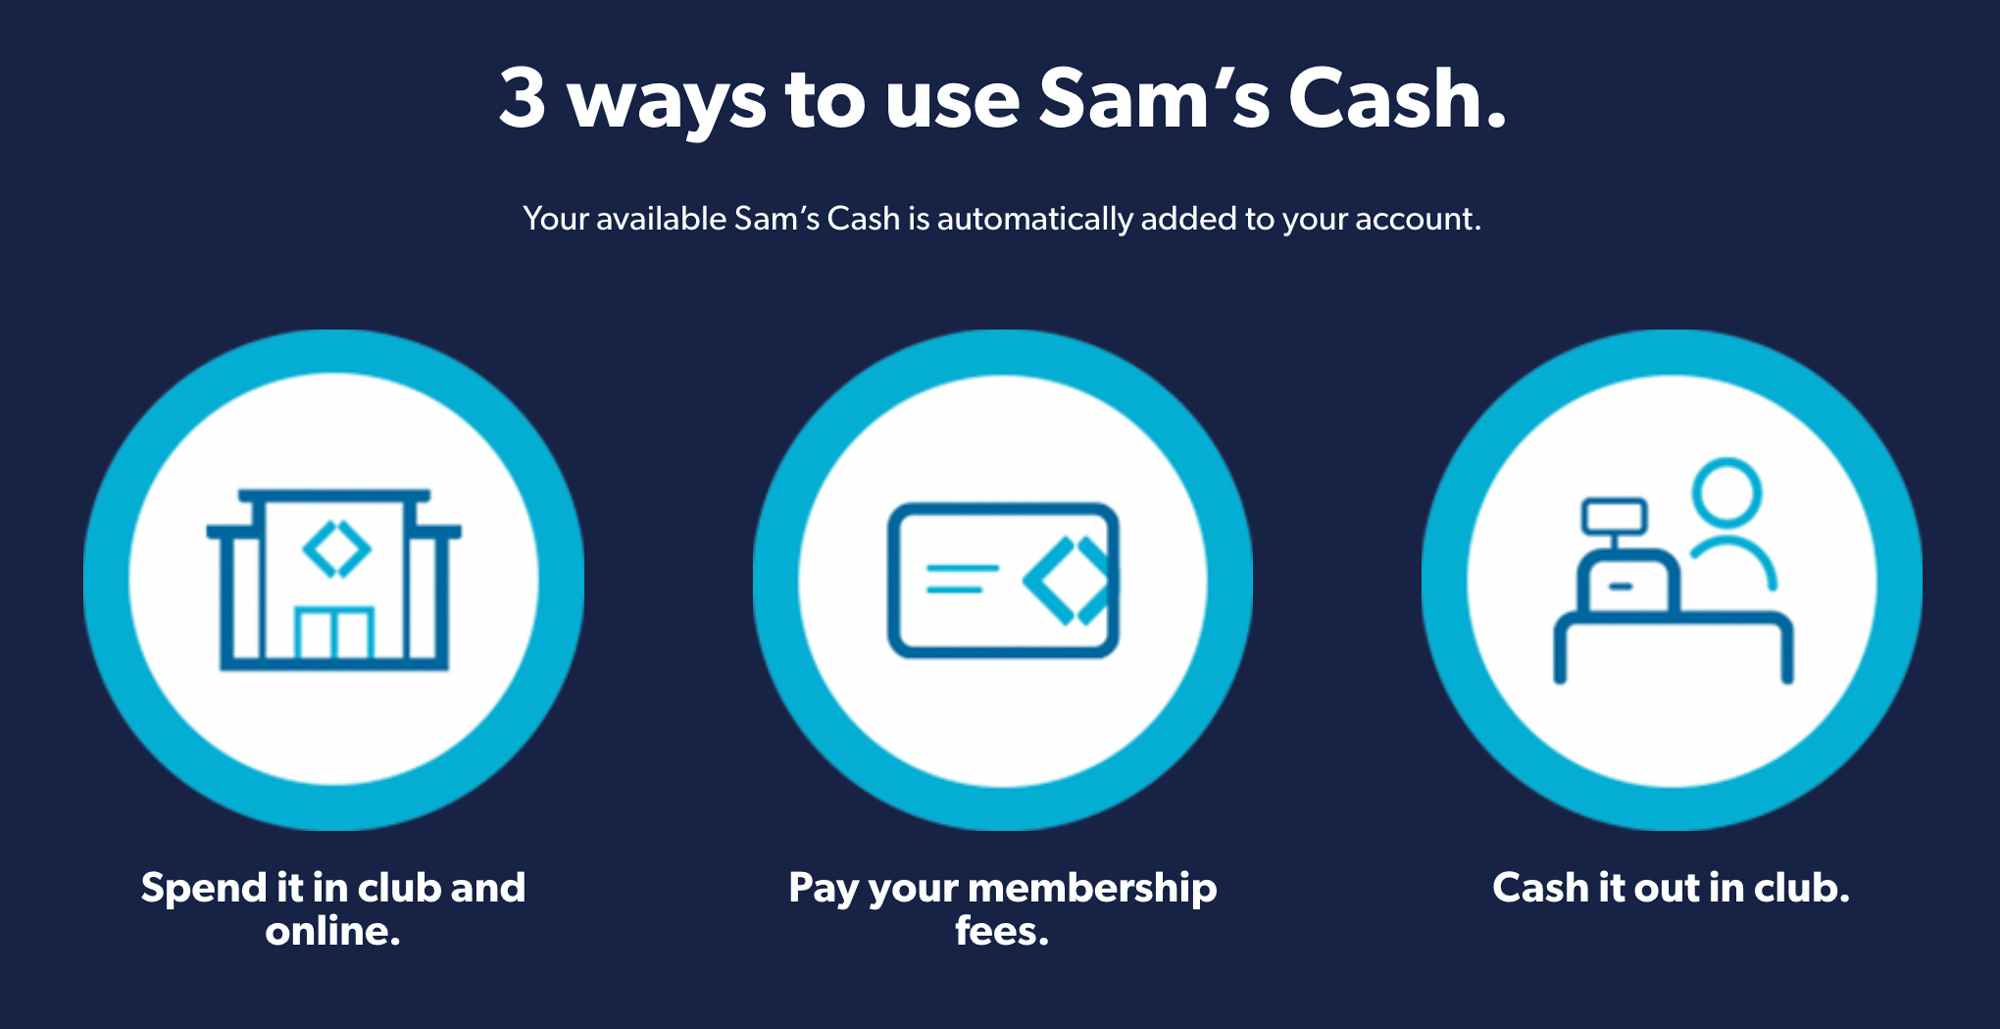 A graphic showing ways to redeem Sam's Cash at Sam's Club